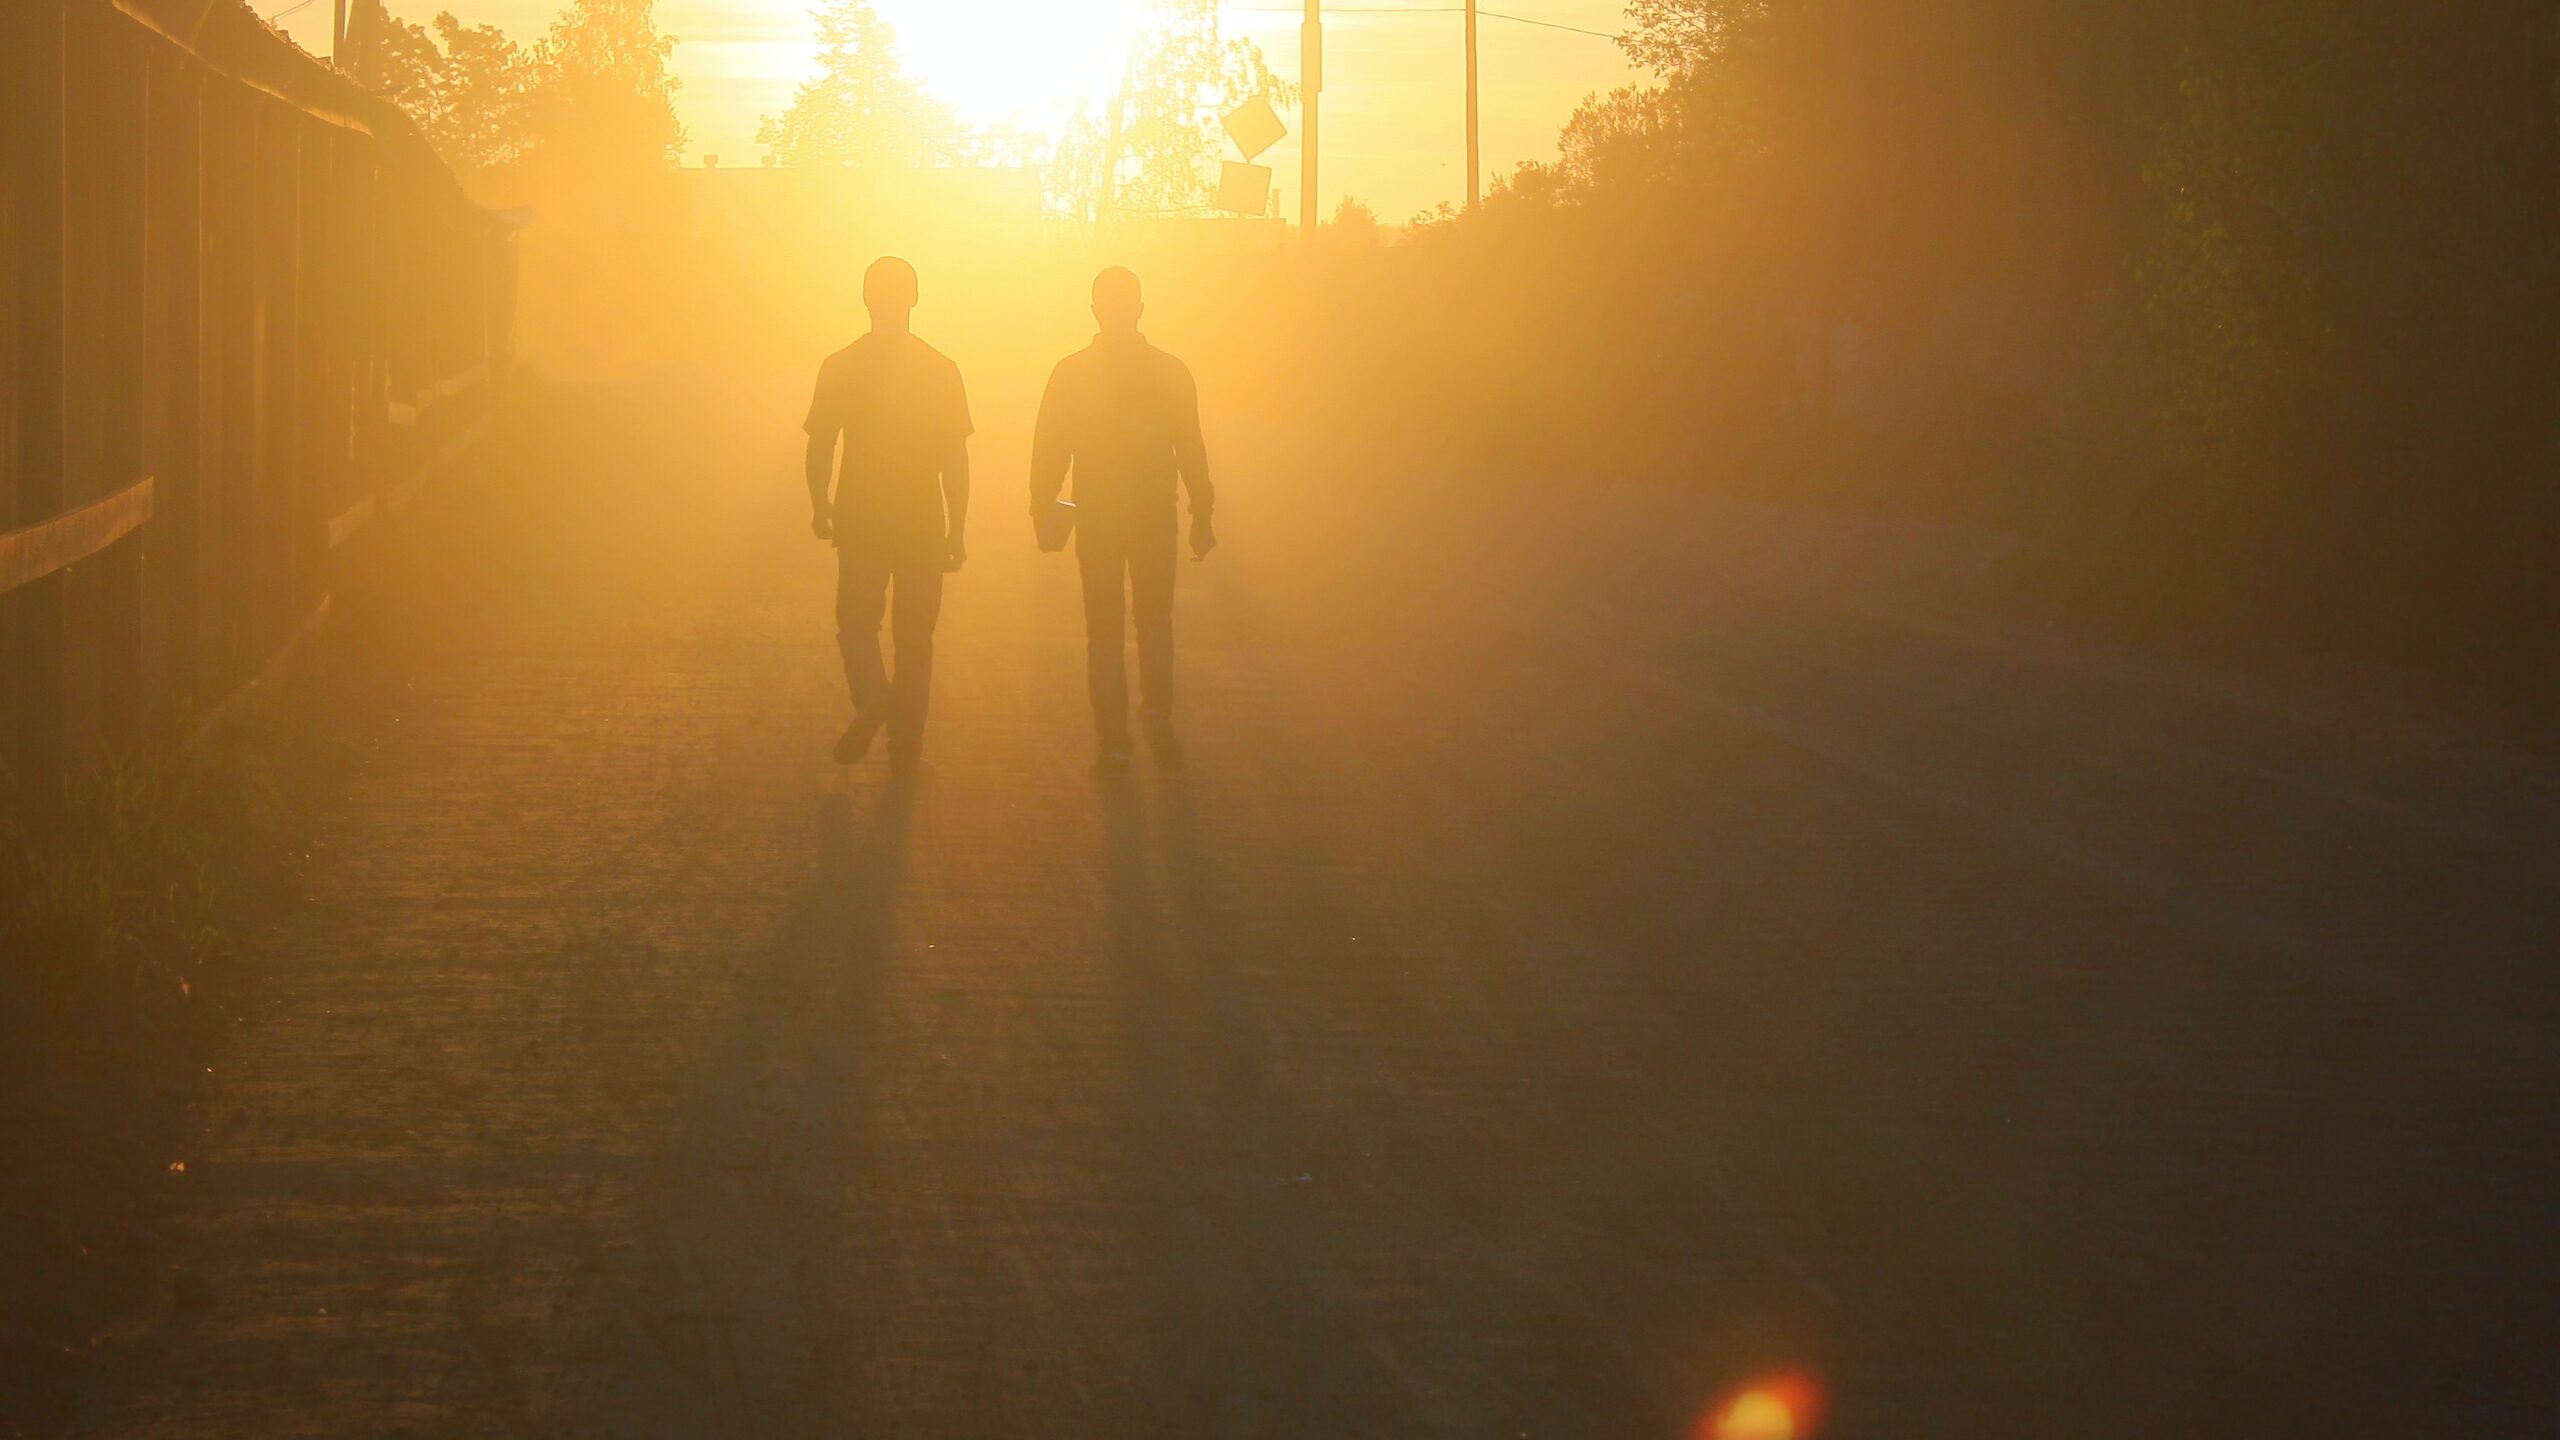 Two silhouettes walking toward the sunset